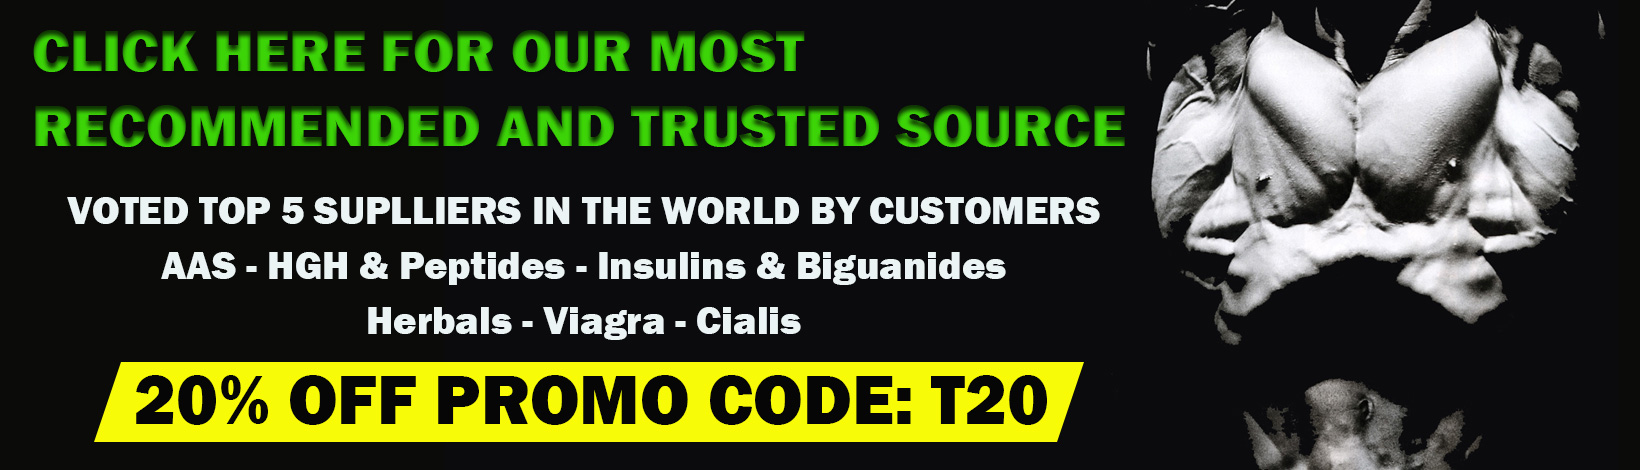 TRUSTED SOURCE LINK 2 1